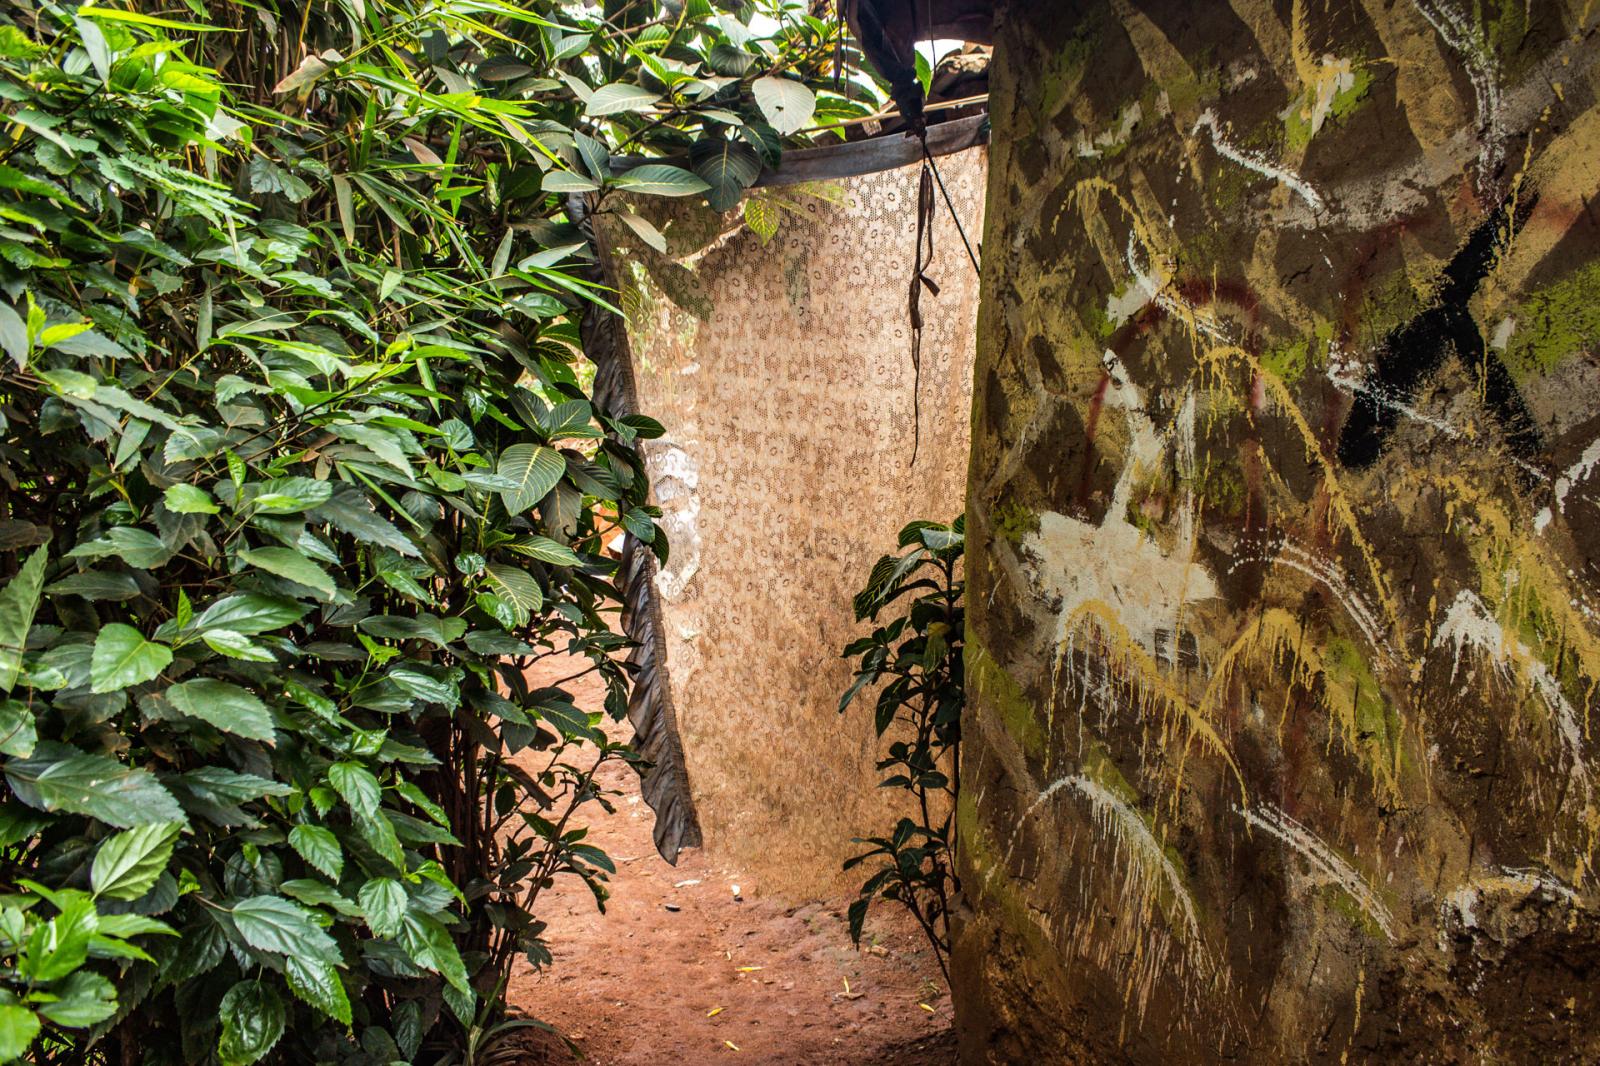  The walkway that takes you to the back section of the house is bordered by plants that Wasswa Denis uses to create a kind of fence around his home in order to establish a form of privacy and prevent strangers from passing through all the time. 